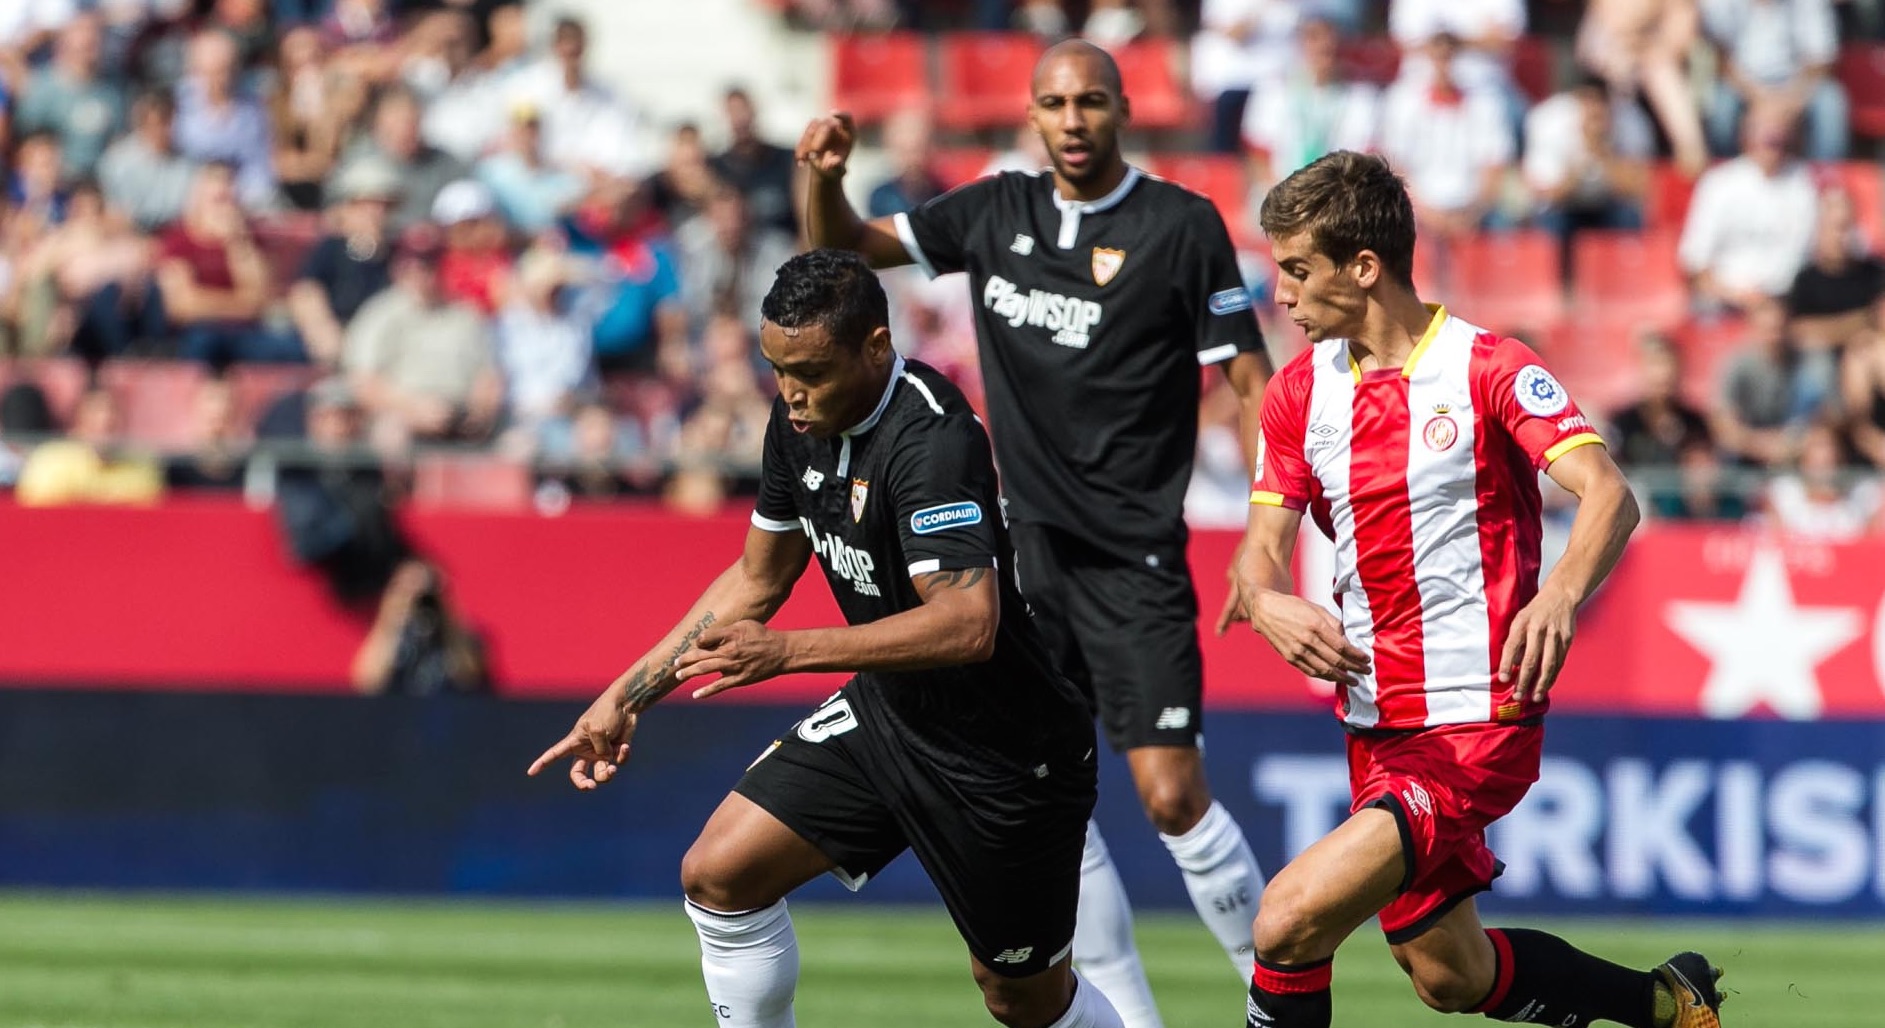 Muriel controls the ball in Sunday's game against Girona CF